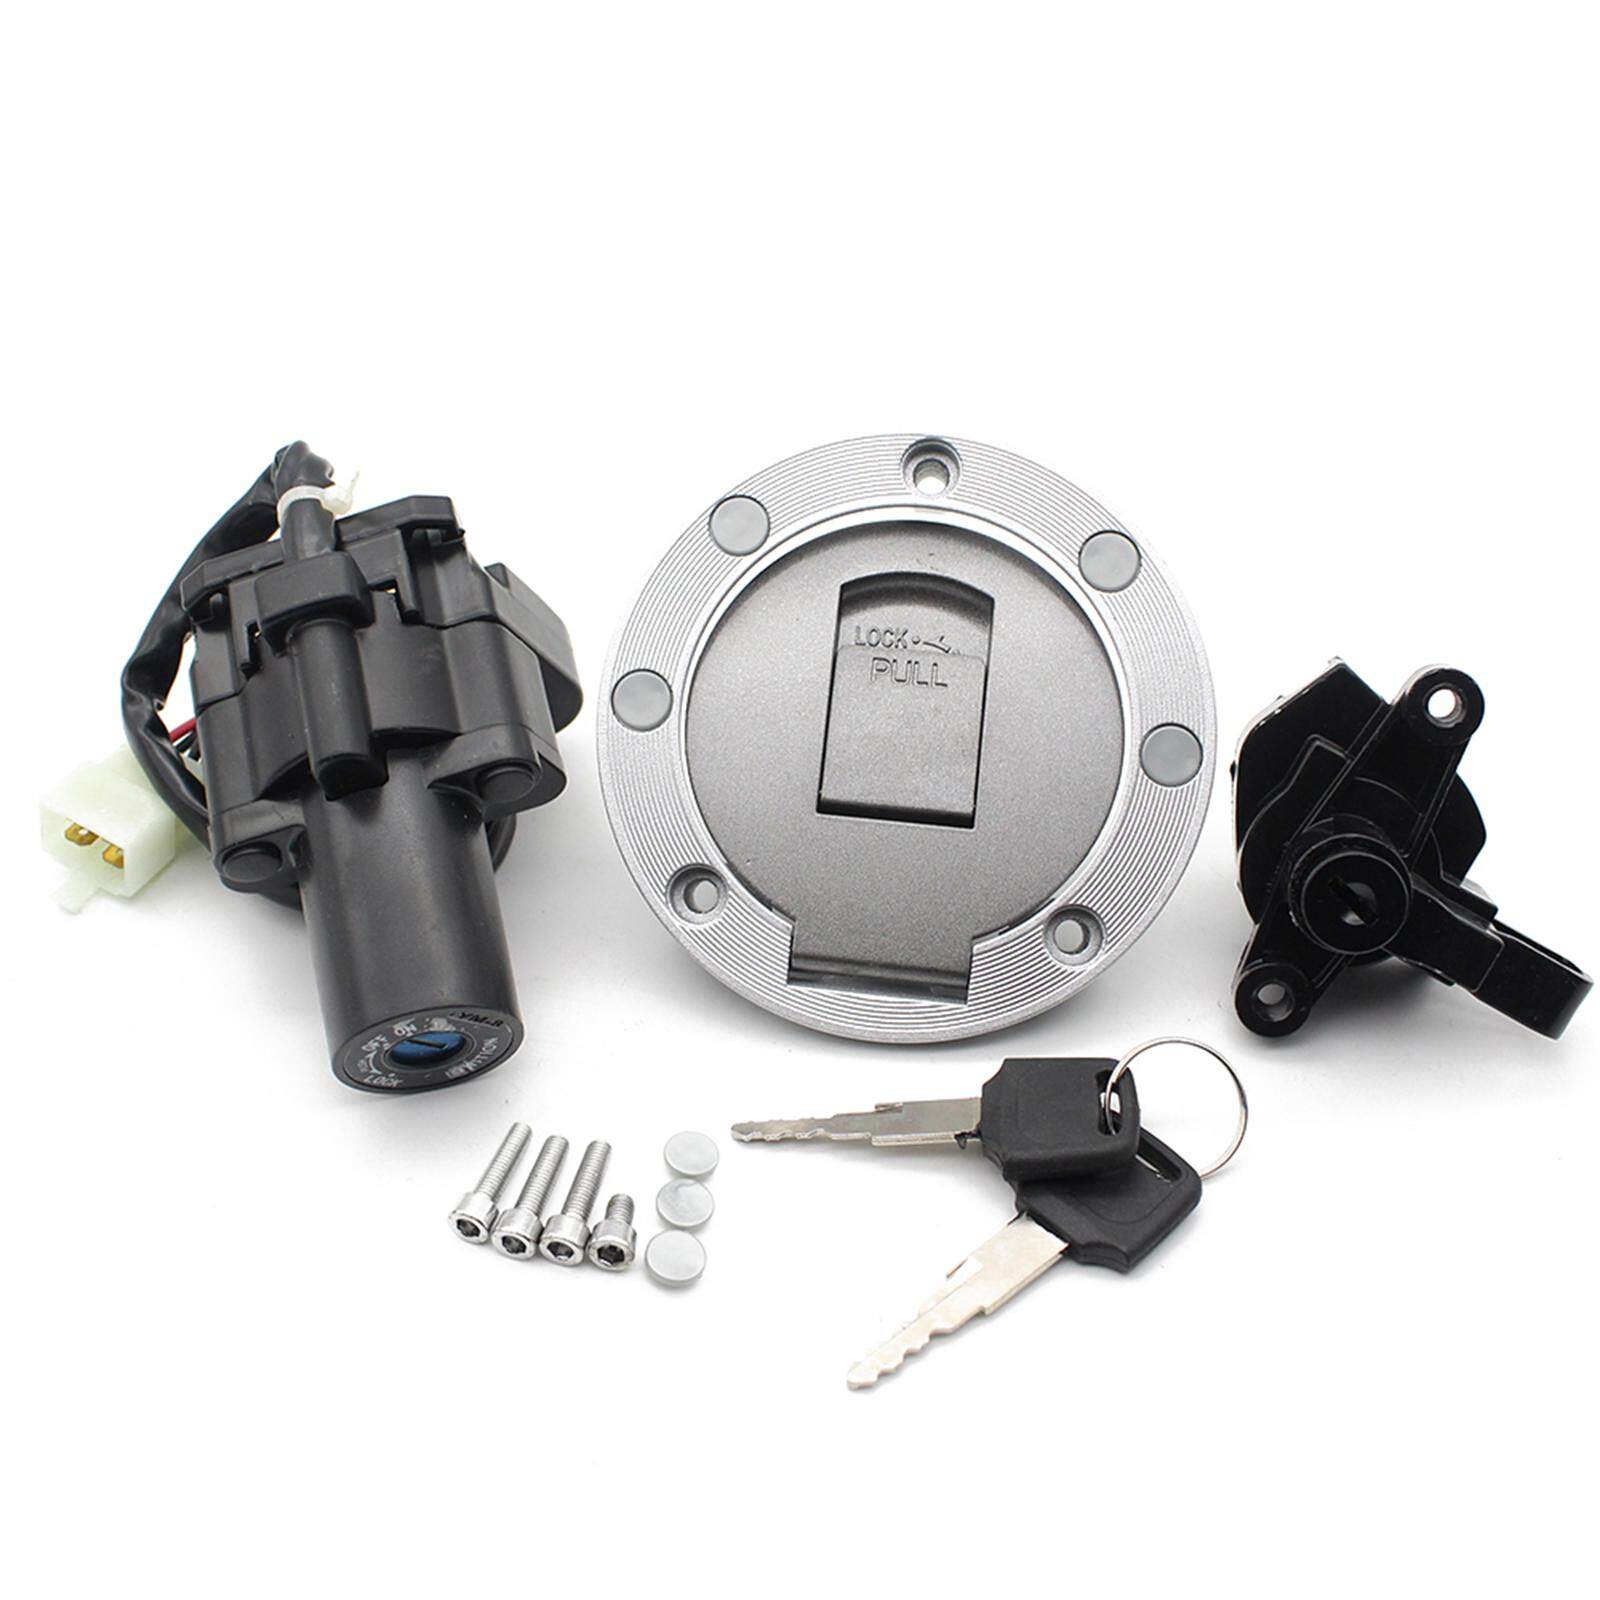 Sturdy Gas Fuel Tank Cap Cover with Keys for Yamaha XJR400 1993-2002 XJR1200 1994-1998 Assembly Parts Modification